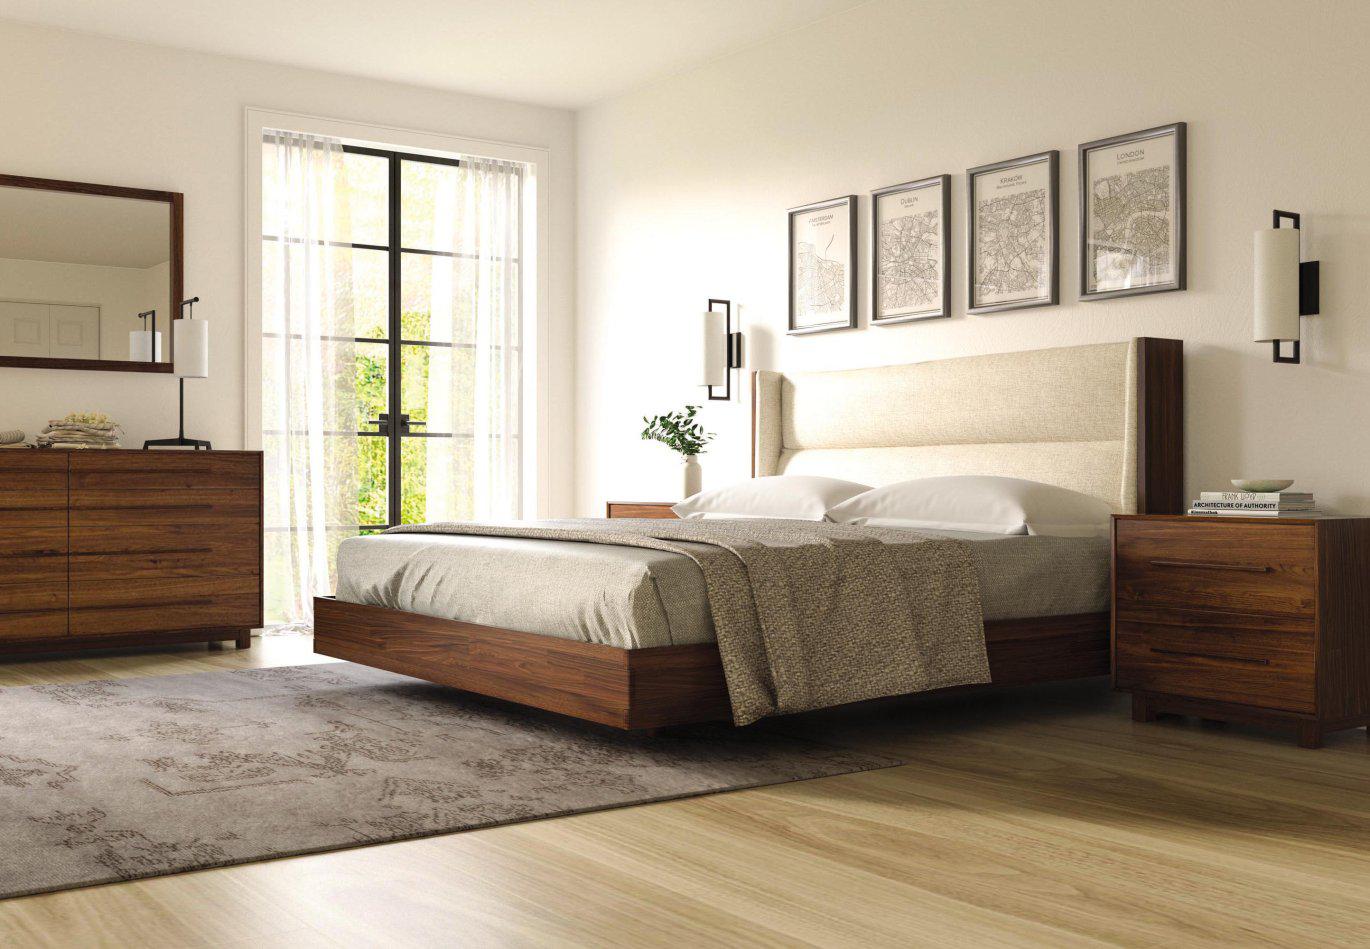 Sloane Bedroom Collection Image